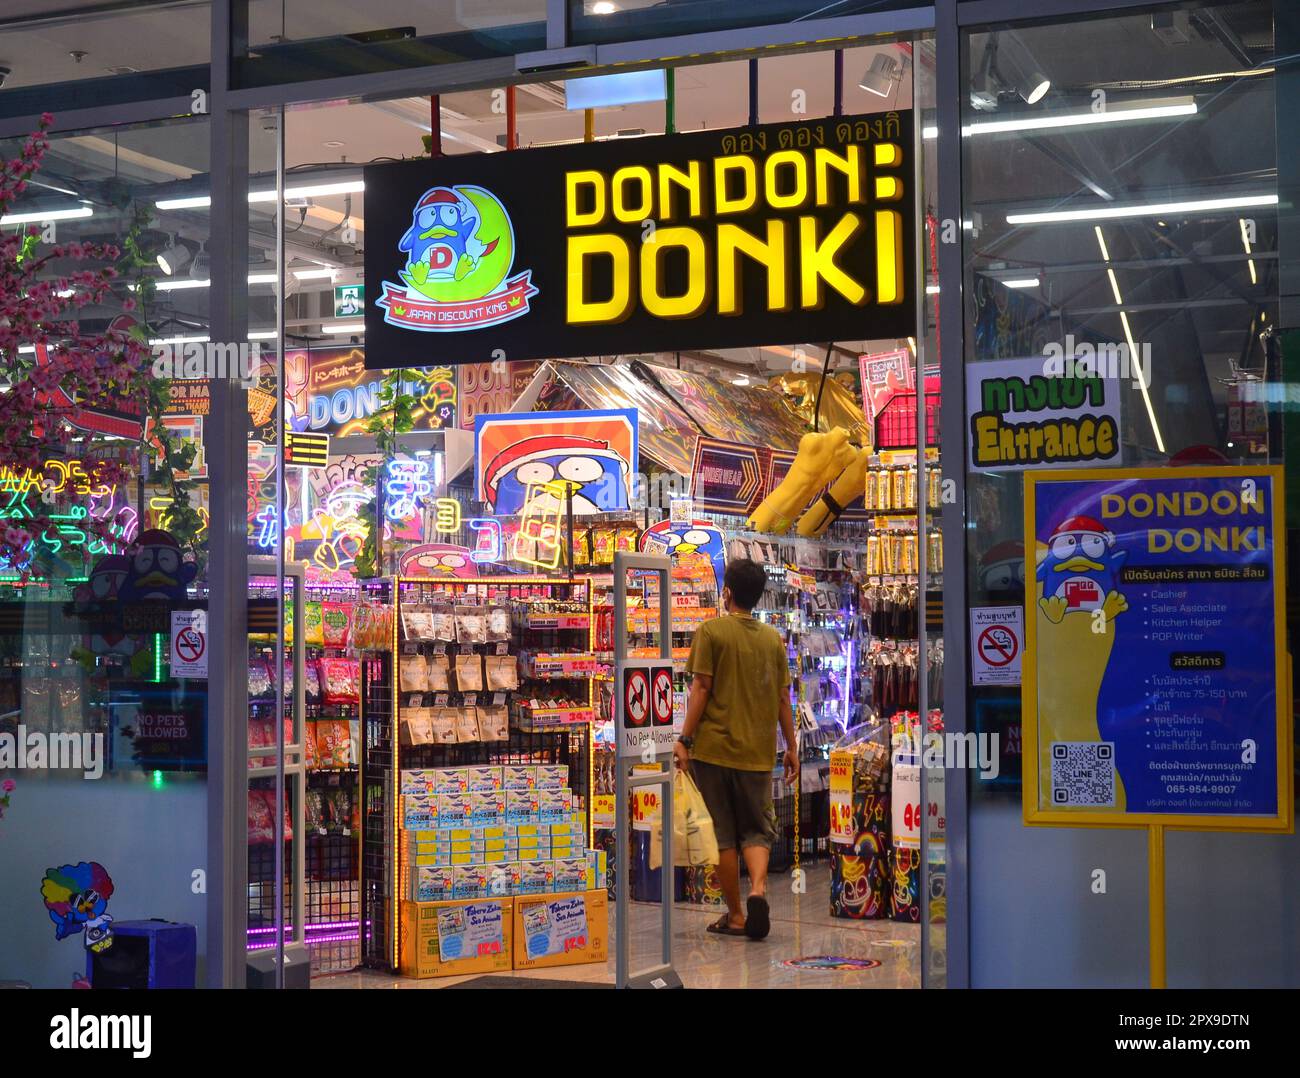 a-shopper-enters-a-shop-to-look-at-products-for-sale-in-don-don-donki-a-japanese-discount-chain-store-in-silom-area-bangkok-thailand-2PX9DTN.jpg